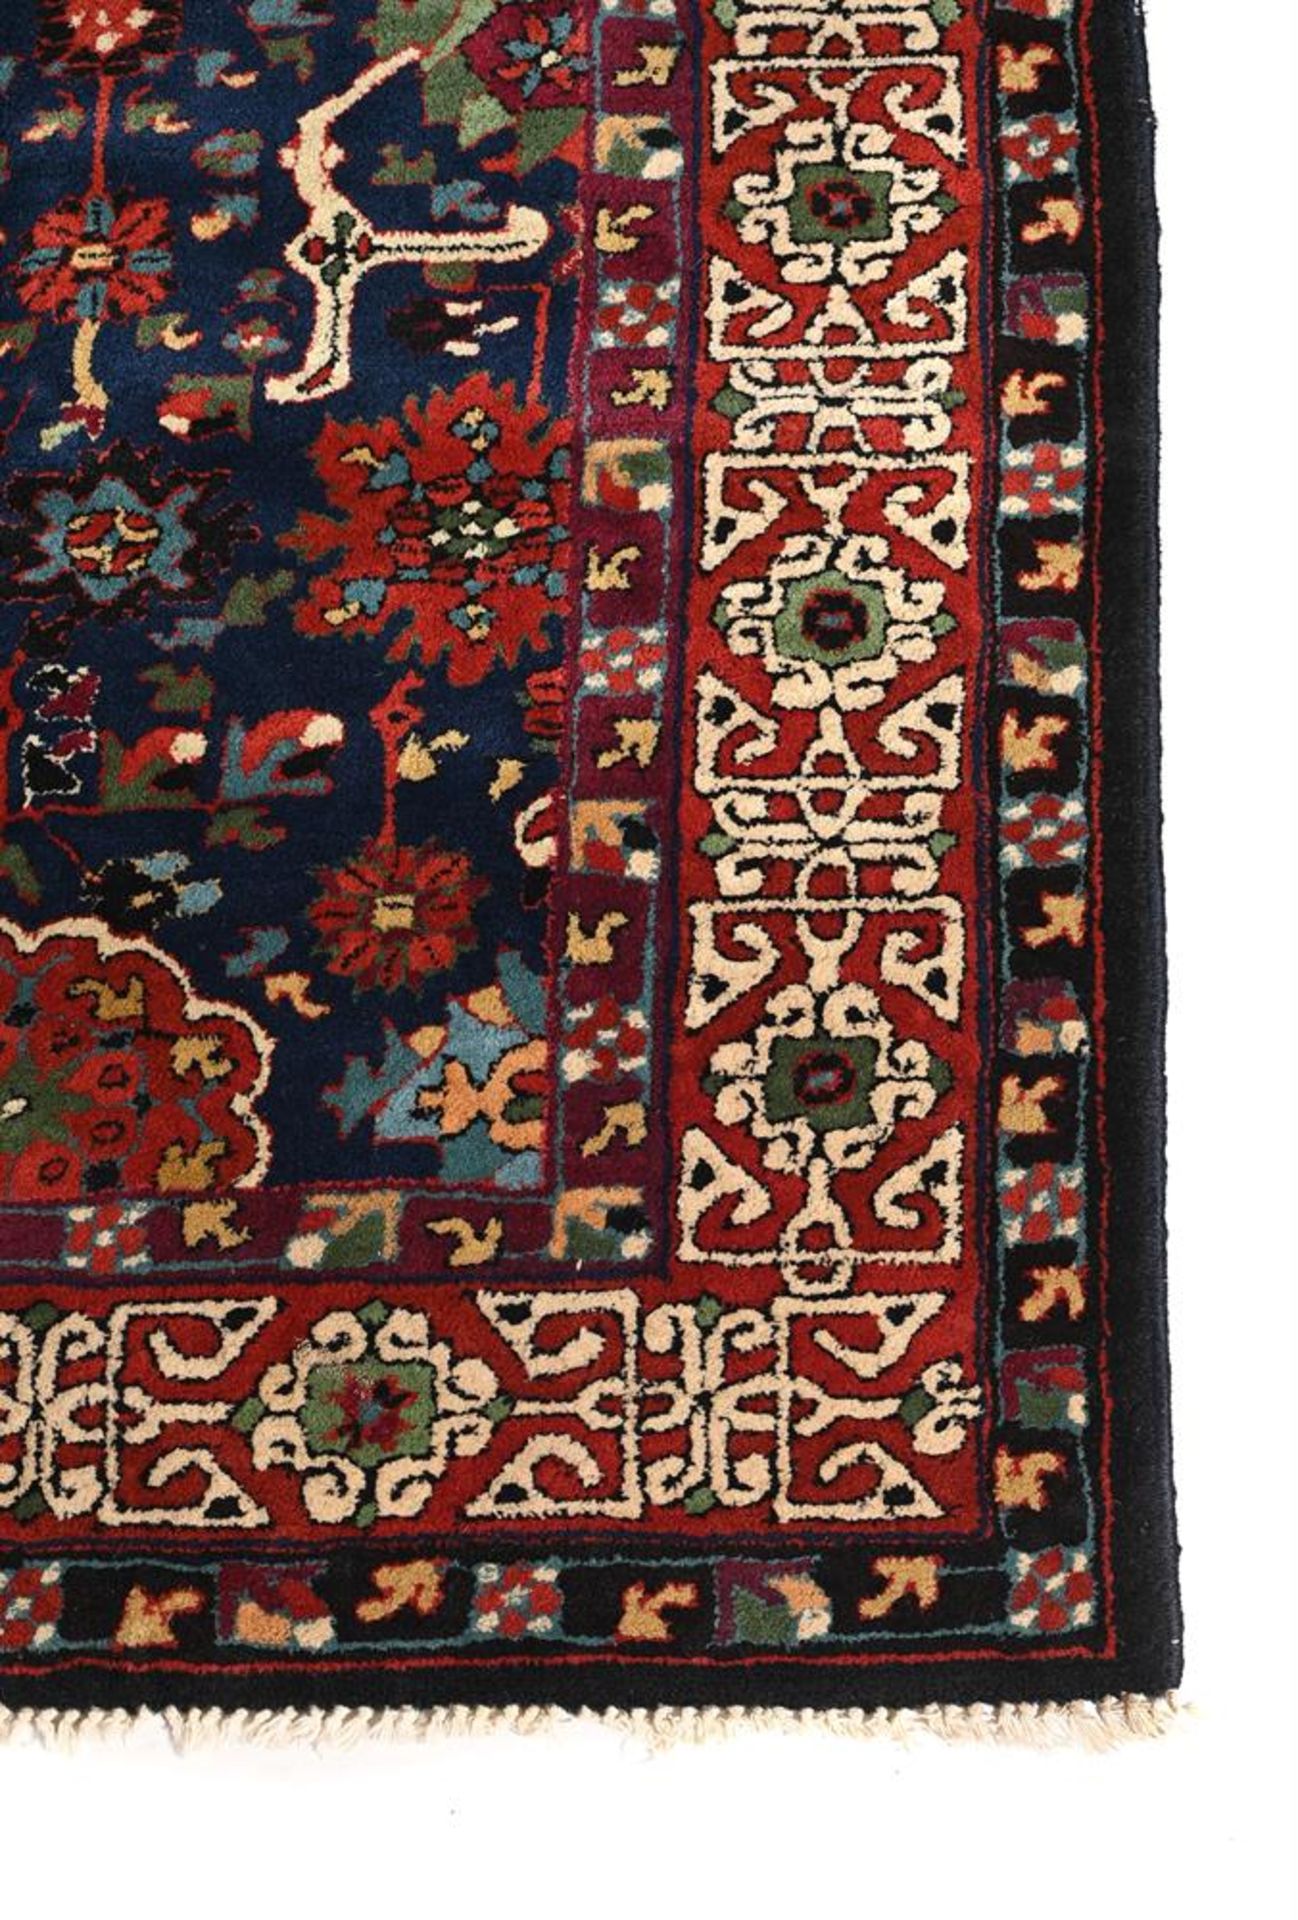 A TETEX CARPET, approximately 317 x 204cm - Image 3 of 3